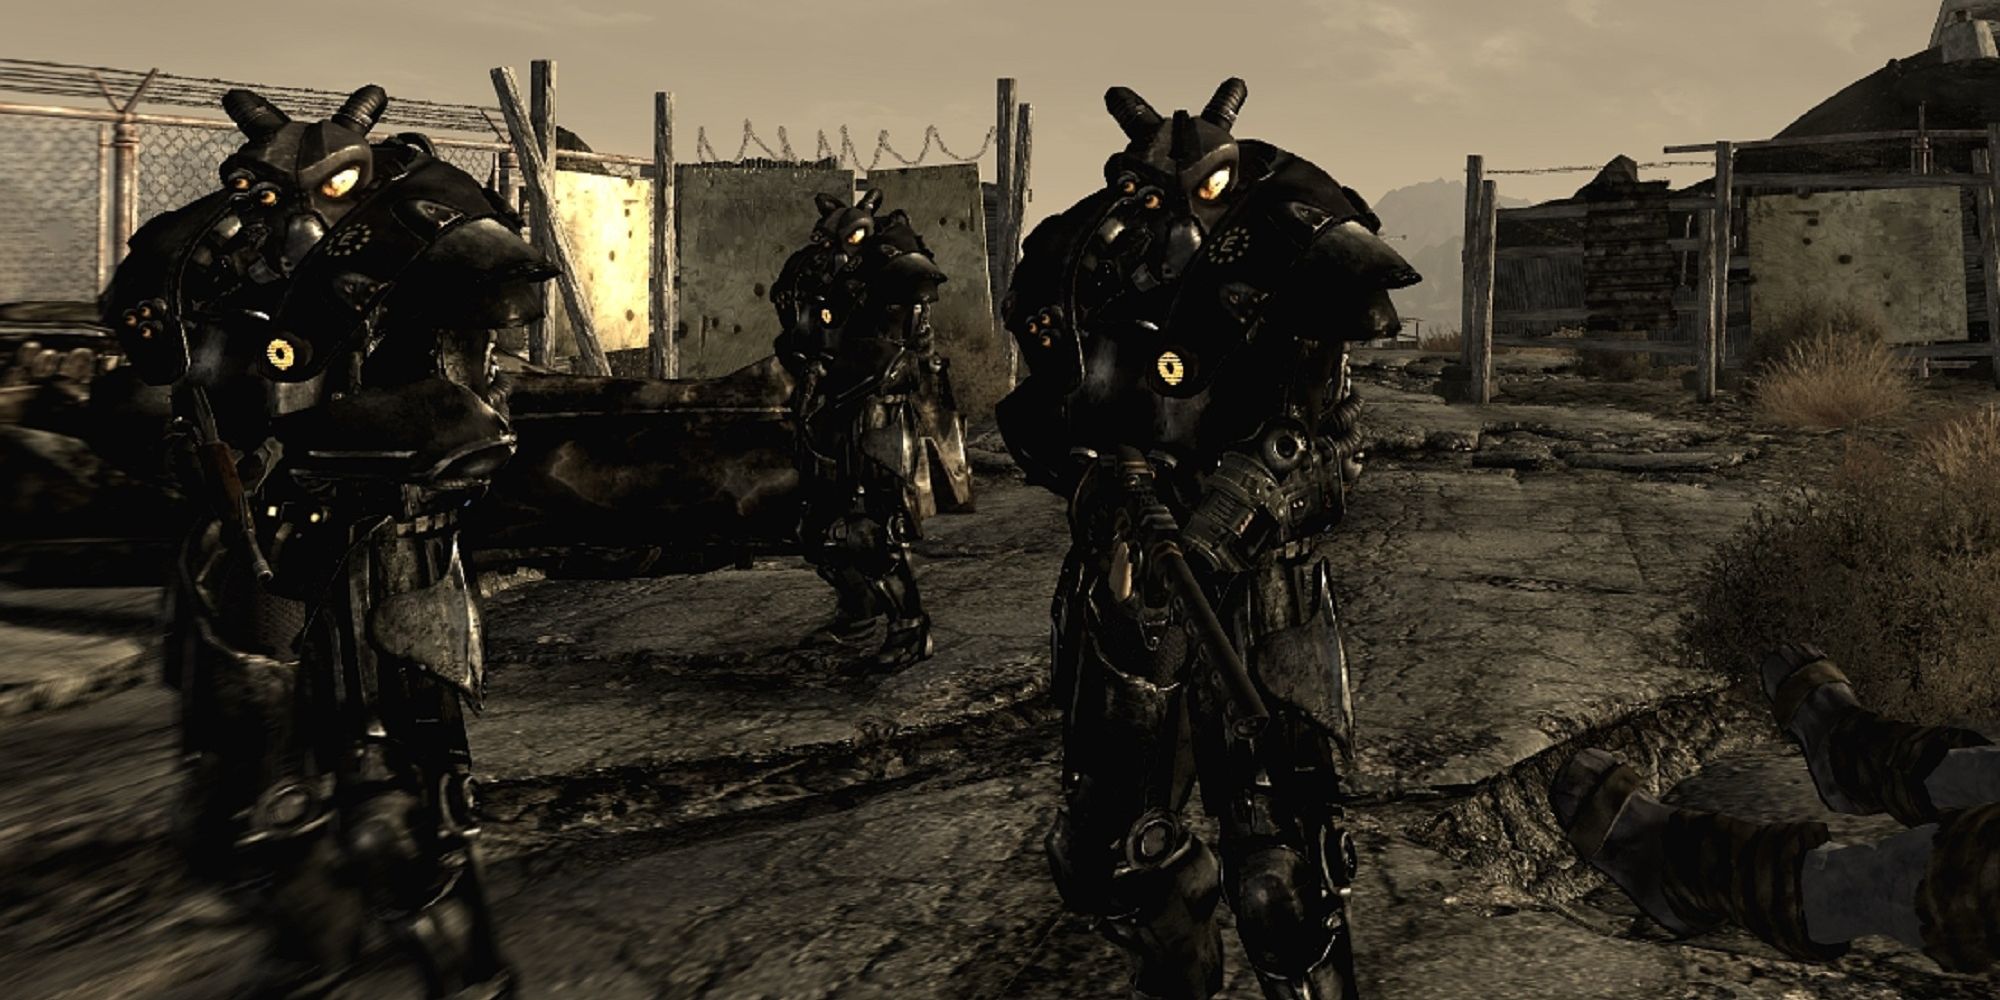 Three Enclave Soldiers Facing The Camera